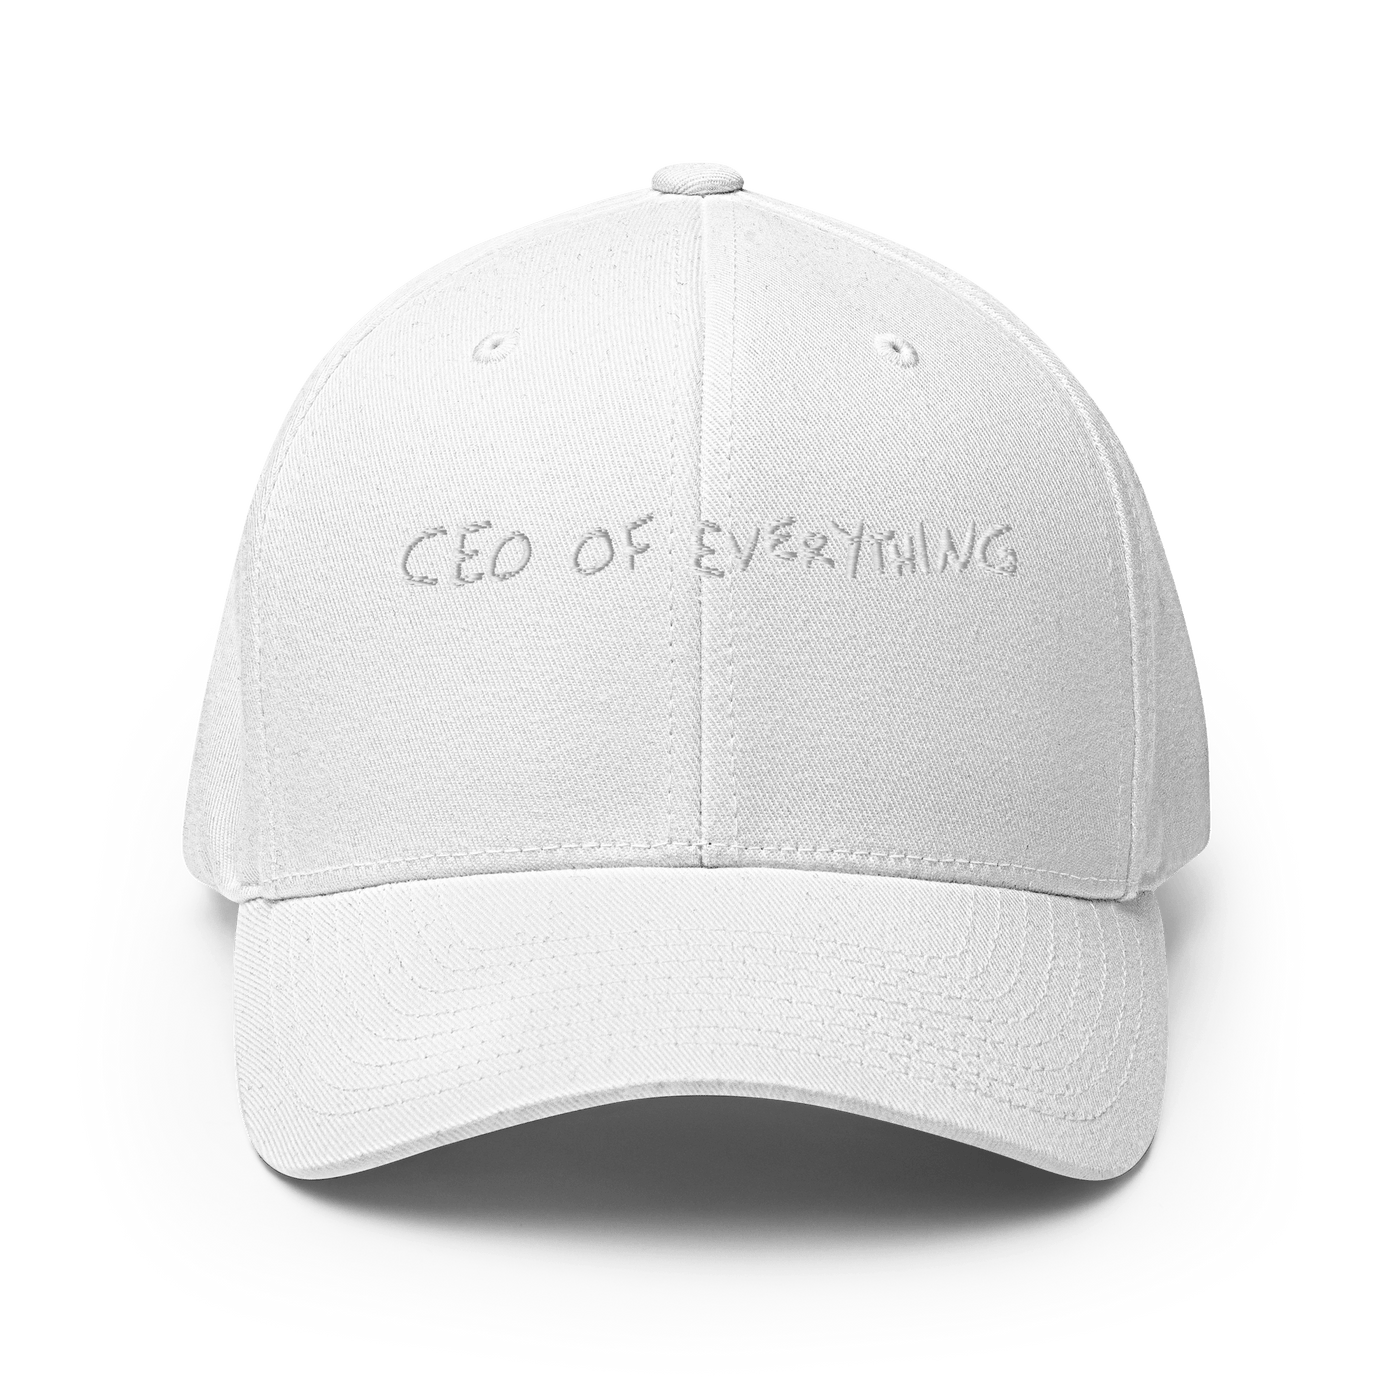 CEO of everything Flexfit cap - Khaki - S/M - Just Another Cap Store